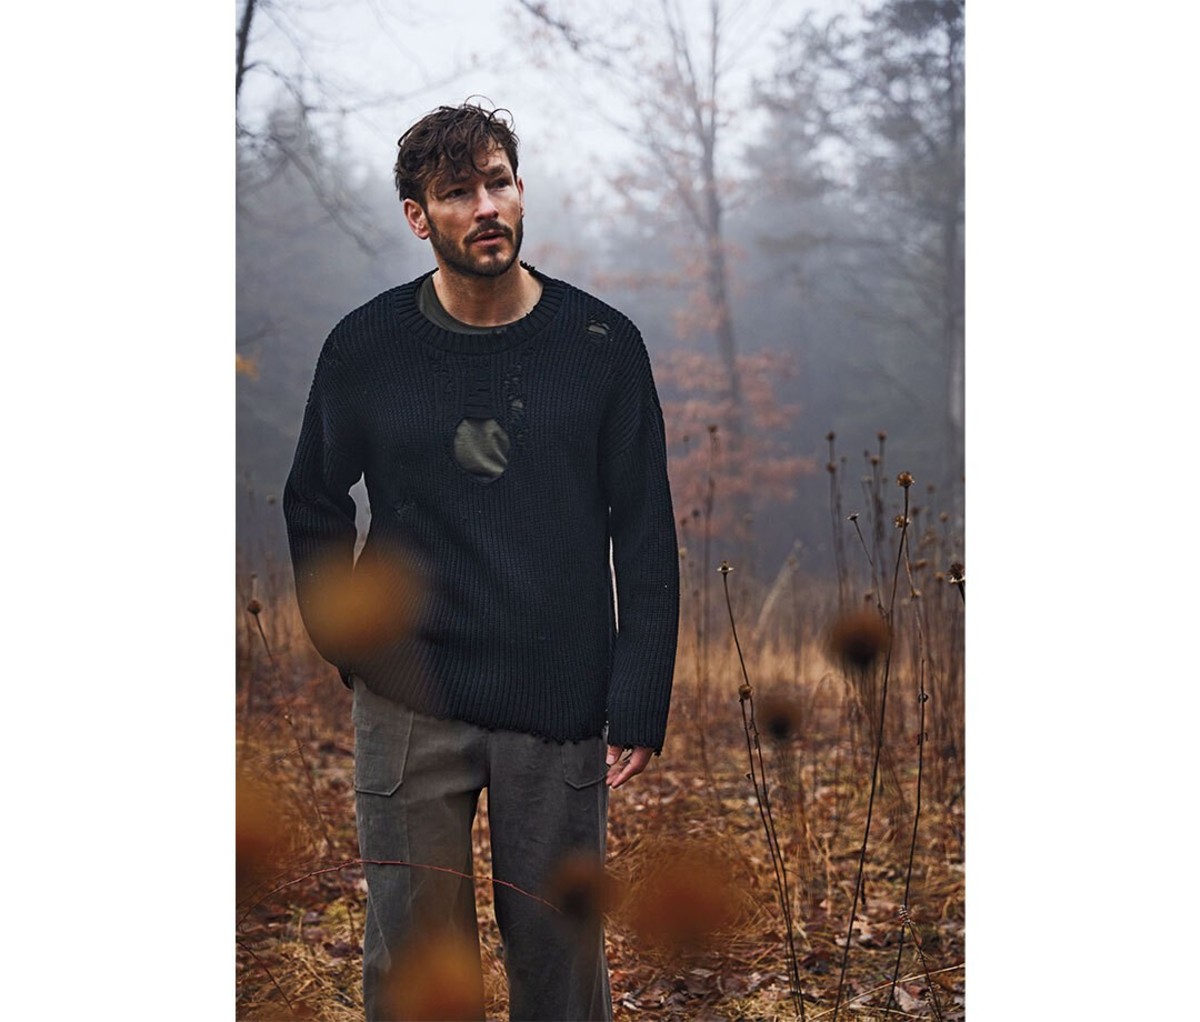 A man in the woods wearing a black sweater